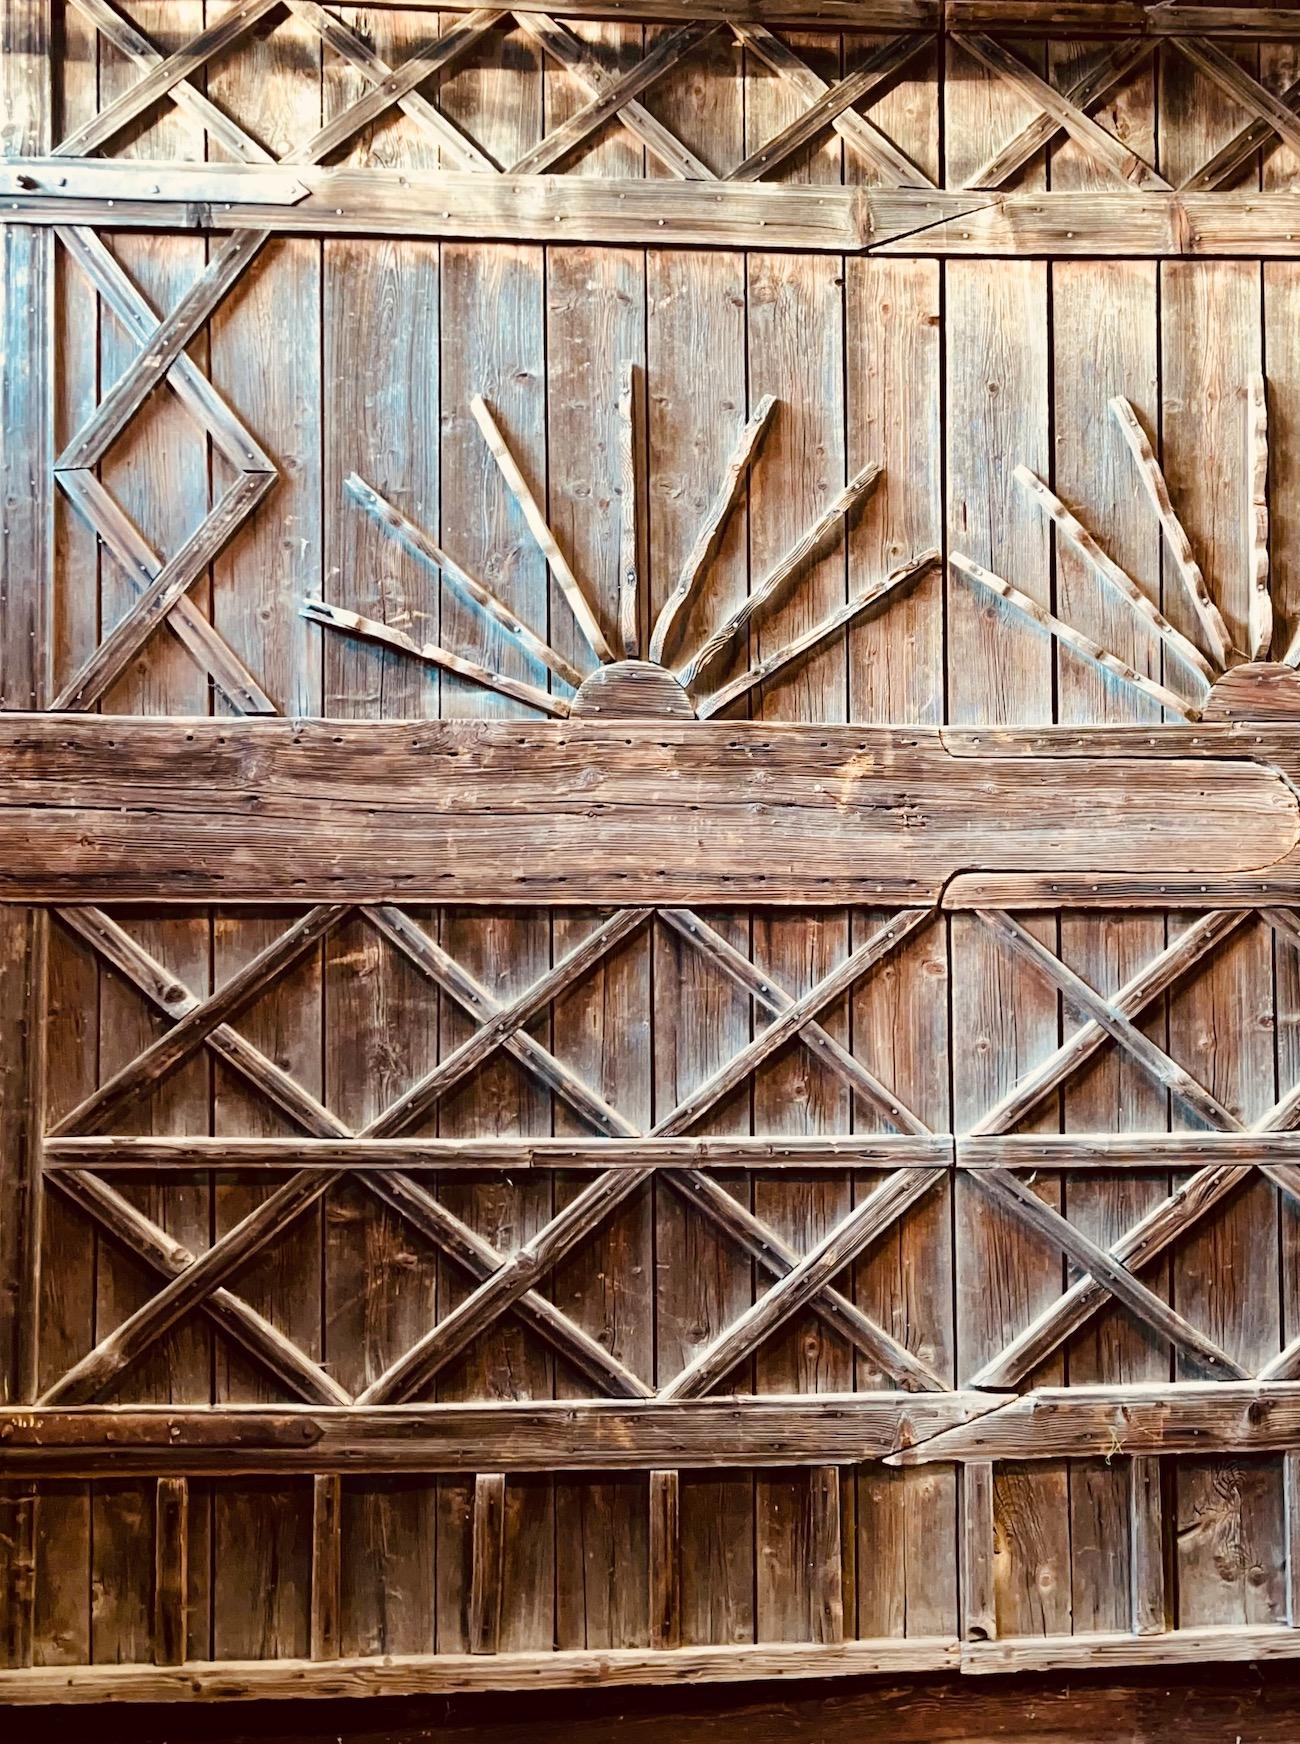 A  beautiful pair of very large interlocking hardwood barn doors which have been in storage in a 19th C. New England barn for many many years. Each door is very intricately and beautifully decorated on their interior sides with a lattice and